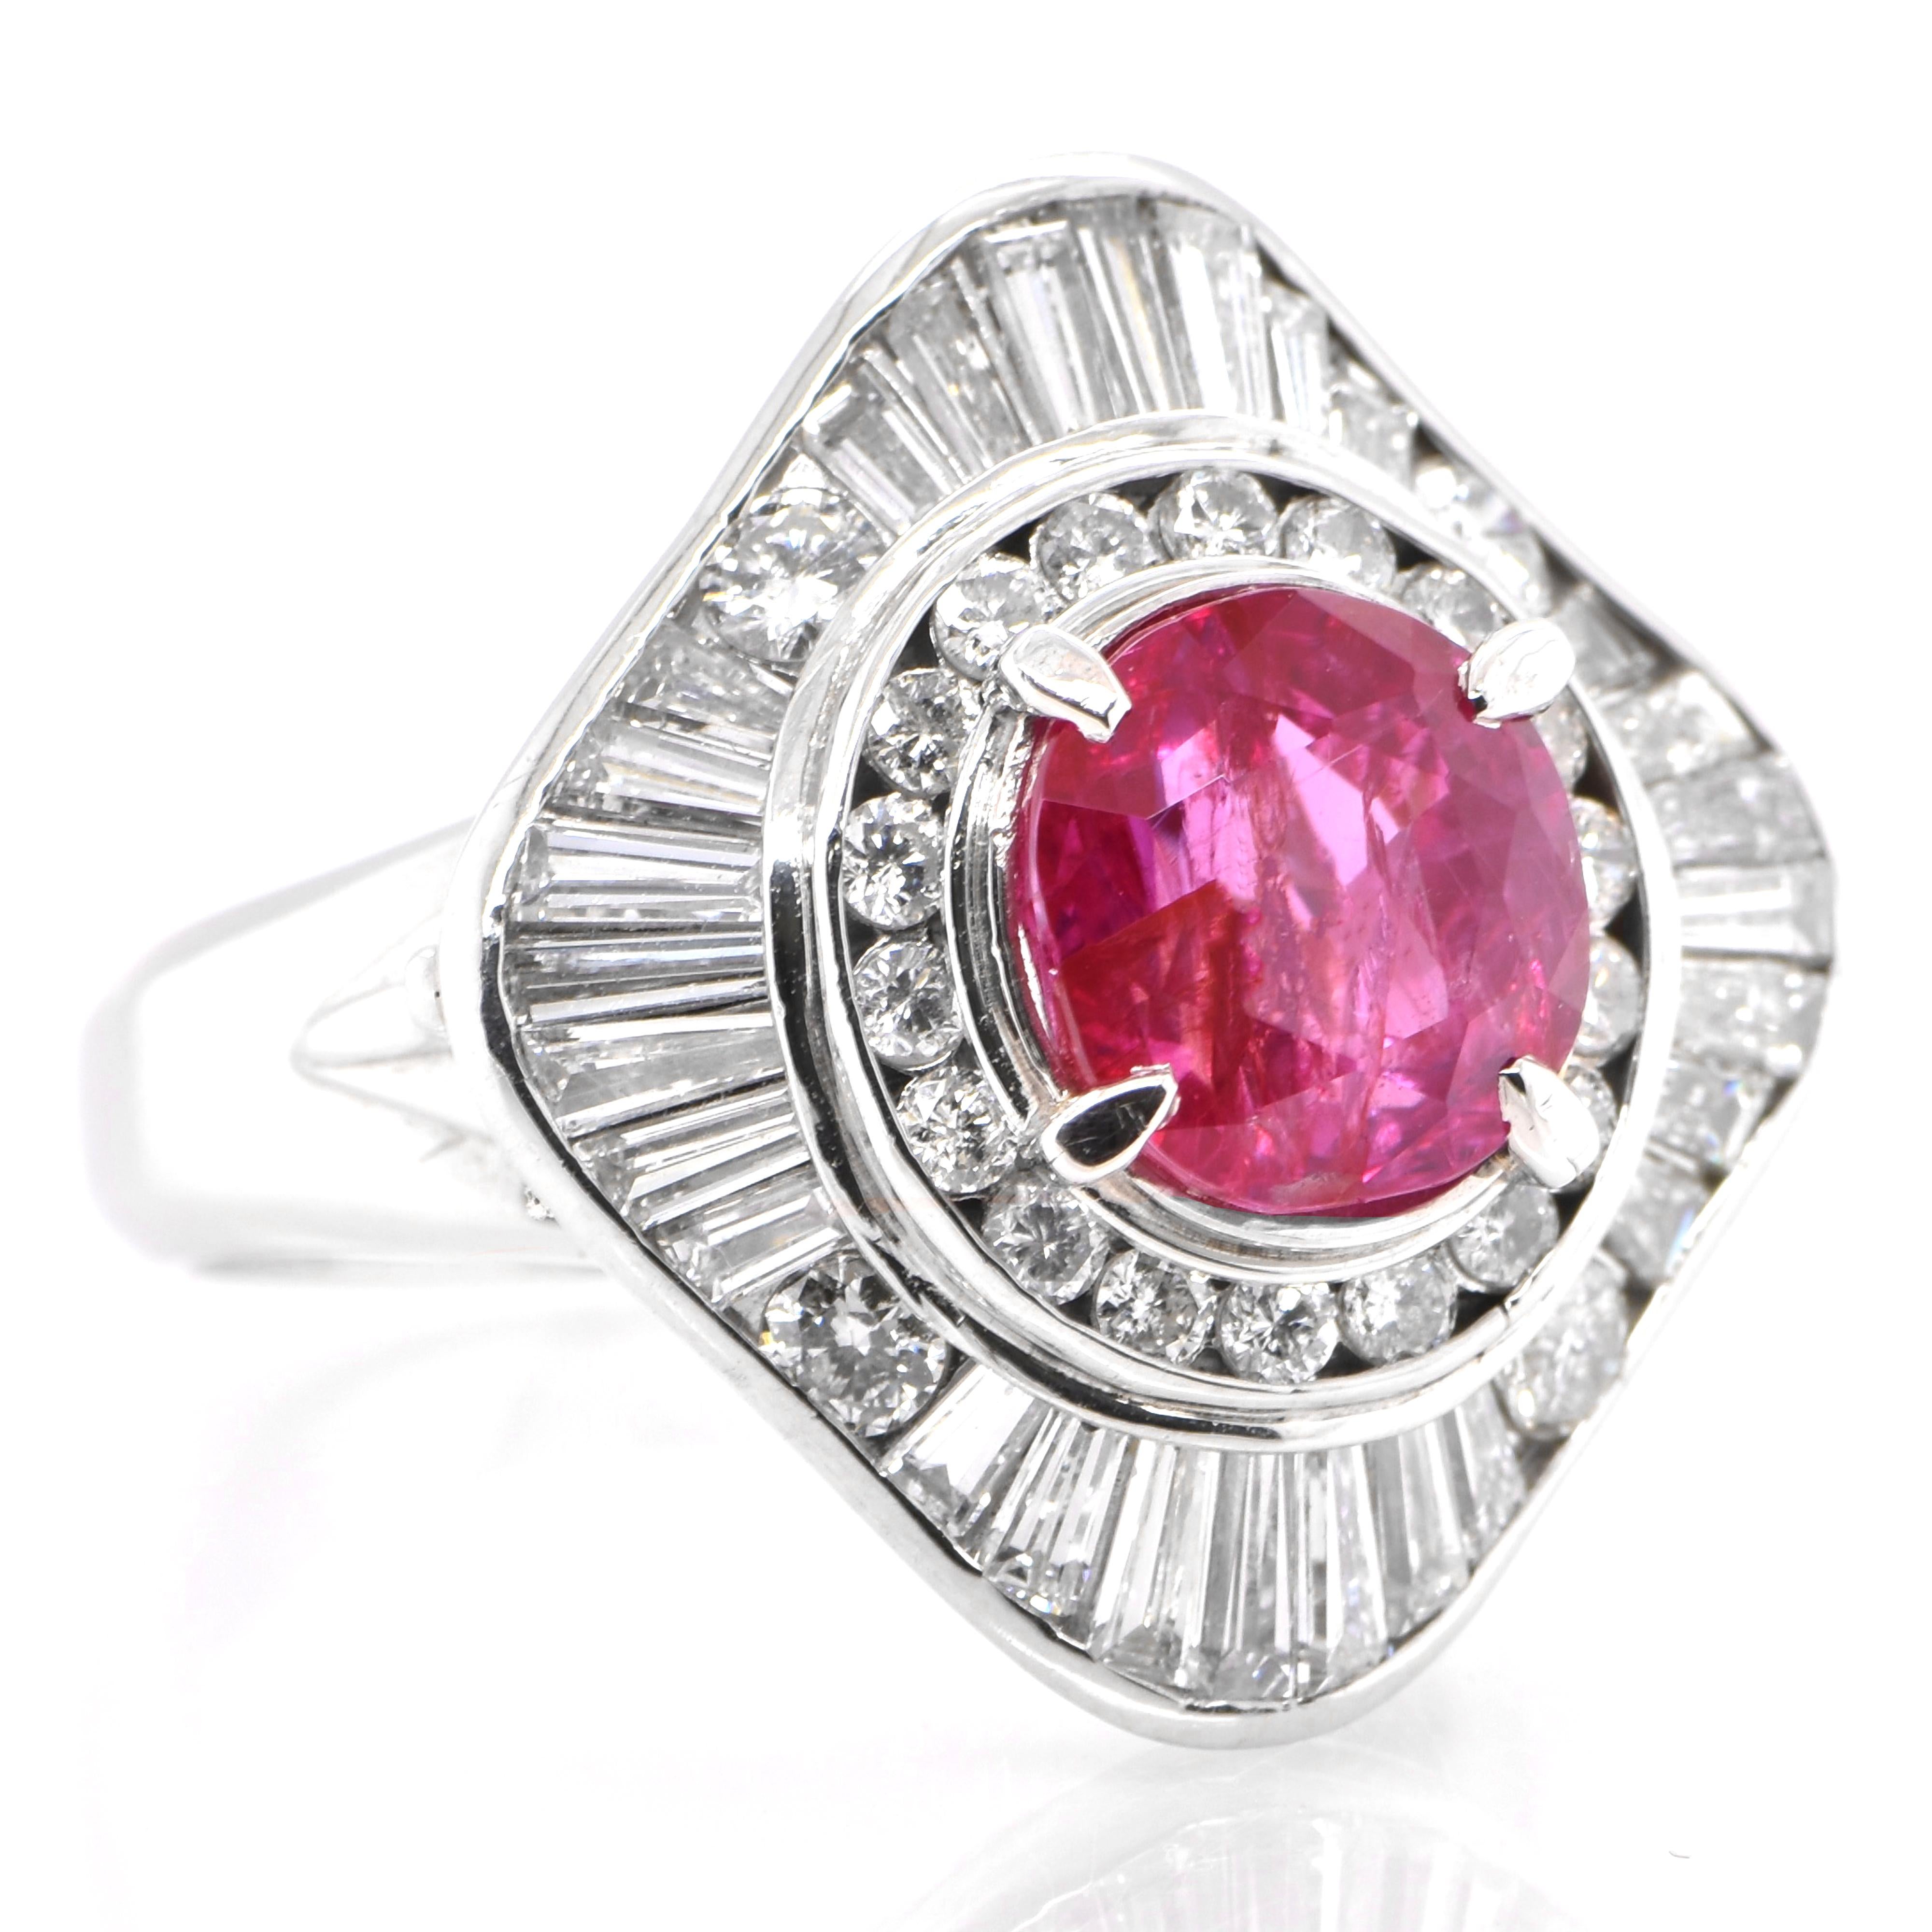 A beautiful ring set in Platinum featuring 3.32 Carats Natural Untreated (No Heat) Ruby and 1.71 Carat Diamonds. Rubies are referred to as 